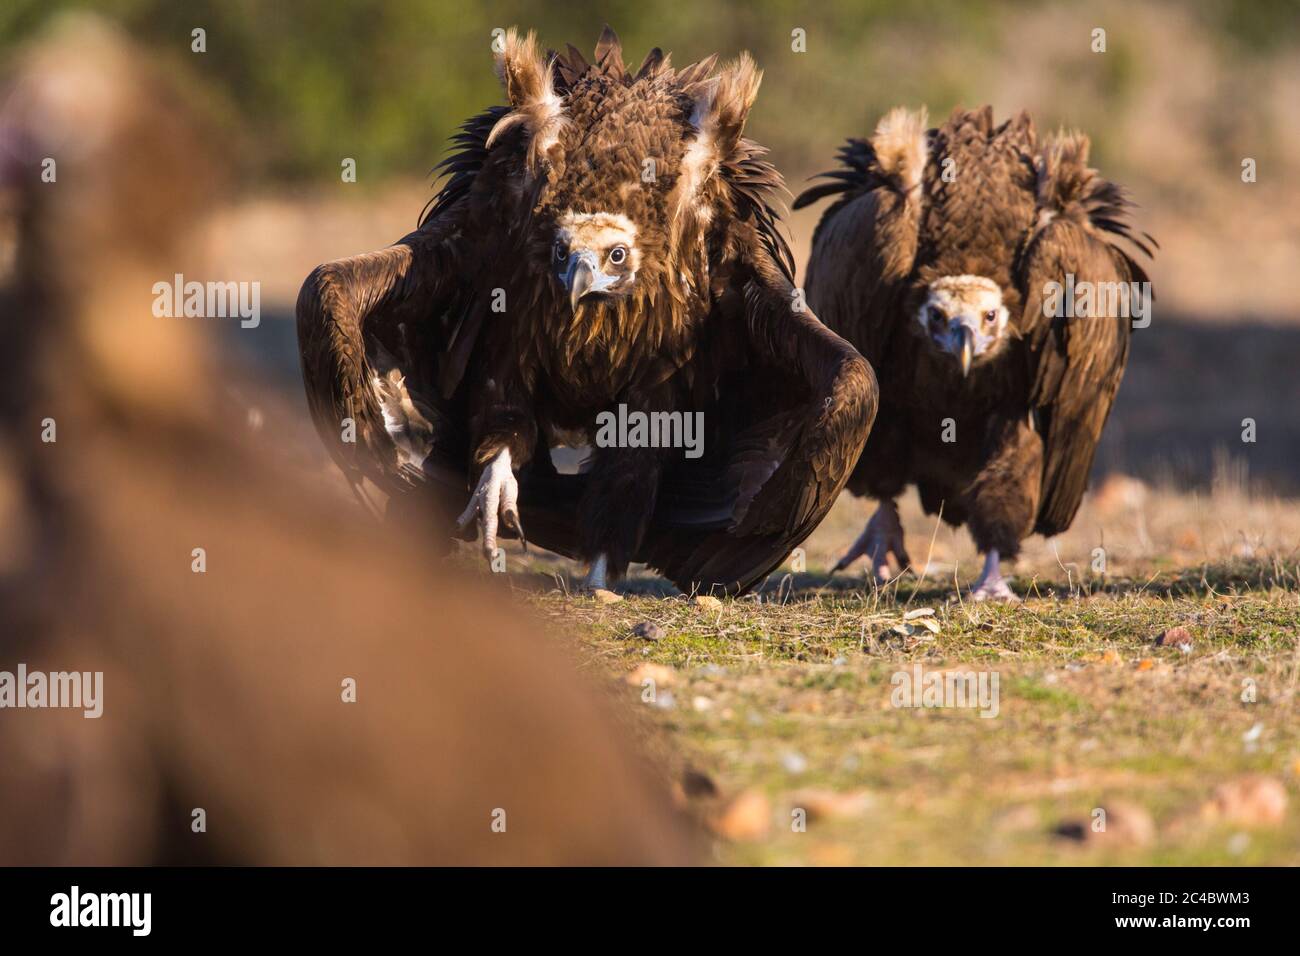 cinereous vulture (Aegypius monachus), Adults in defending position with wings raised, Spain, Extremadura, Caceres Stock Photo